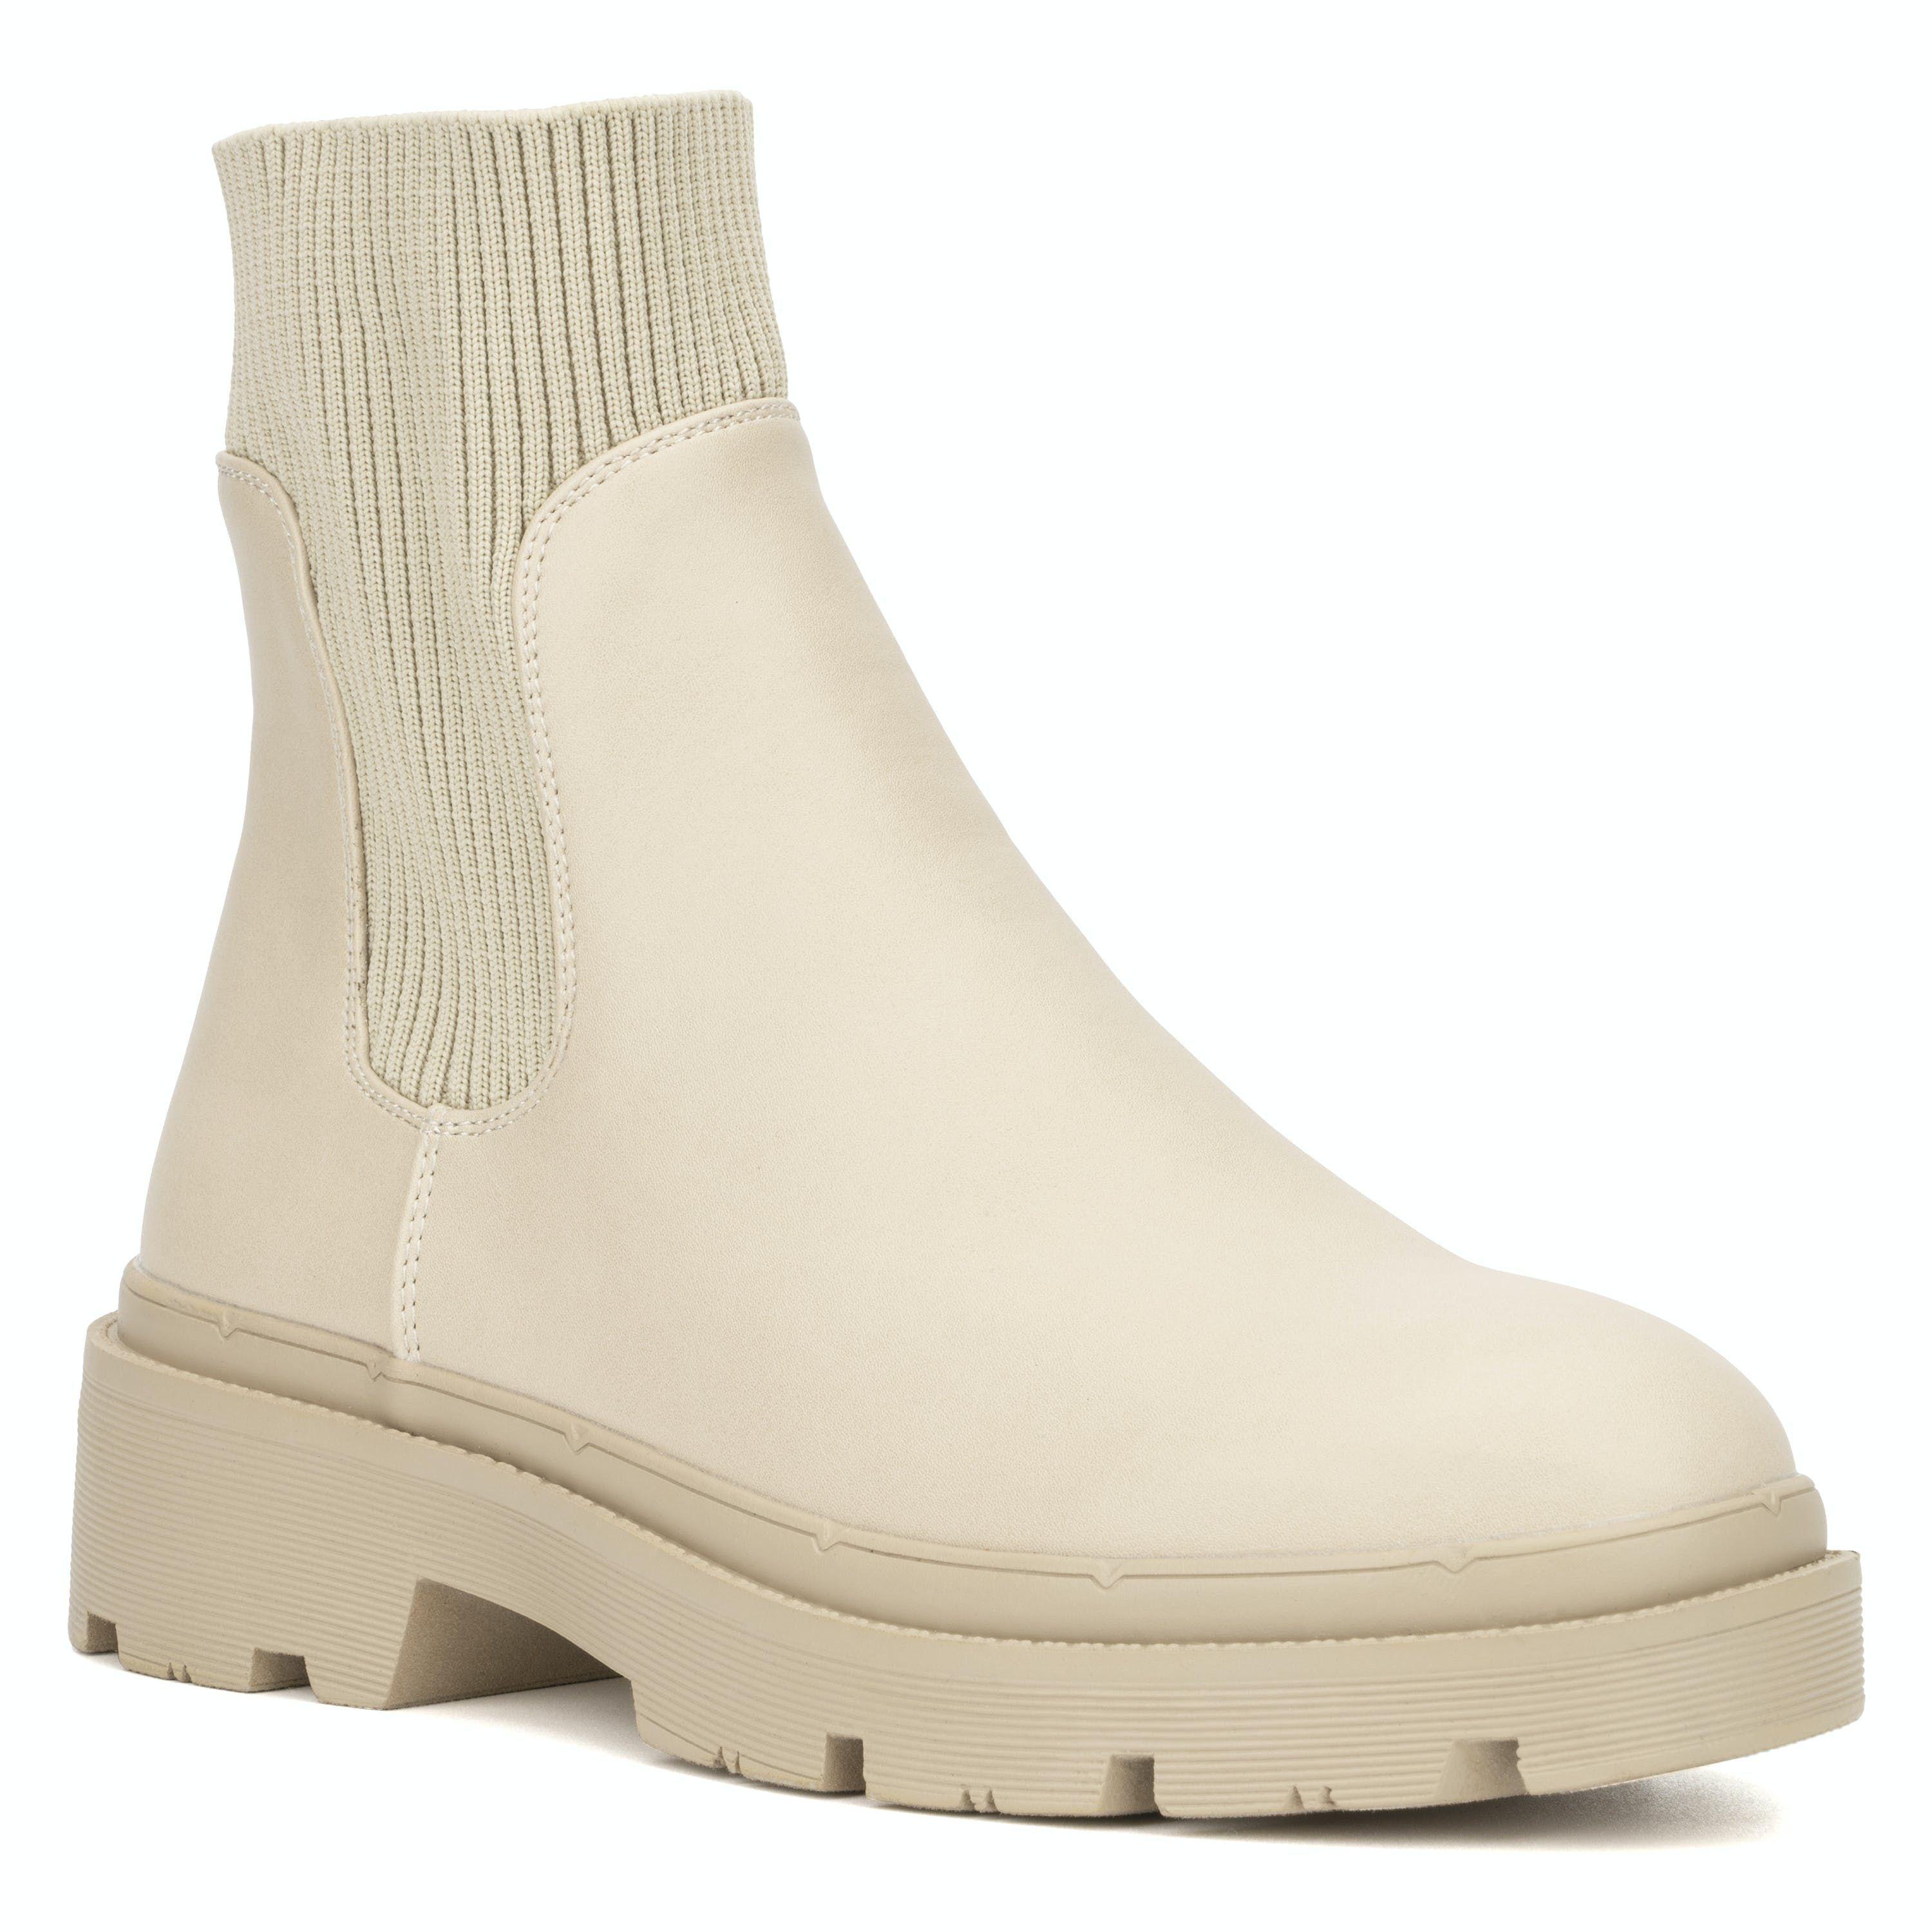 Olivia Miller Saphira Boot in Natural | Lyst